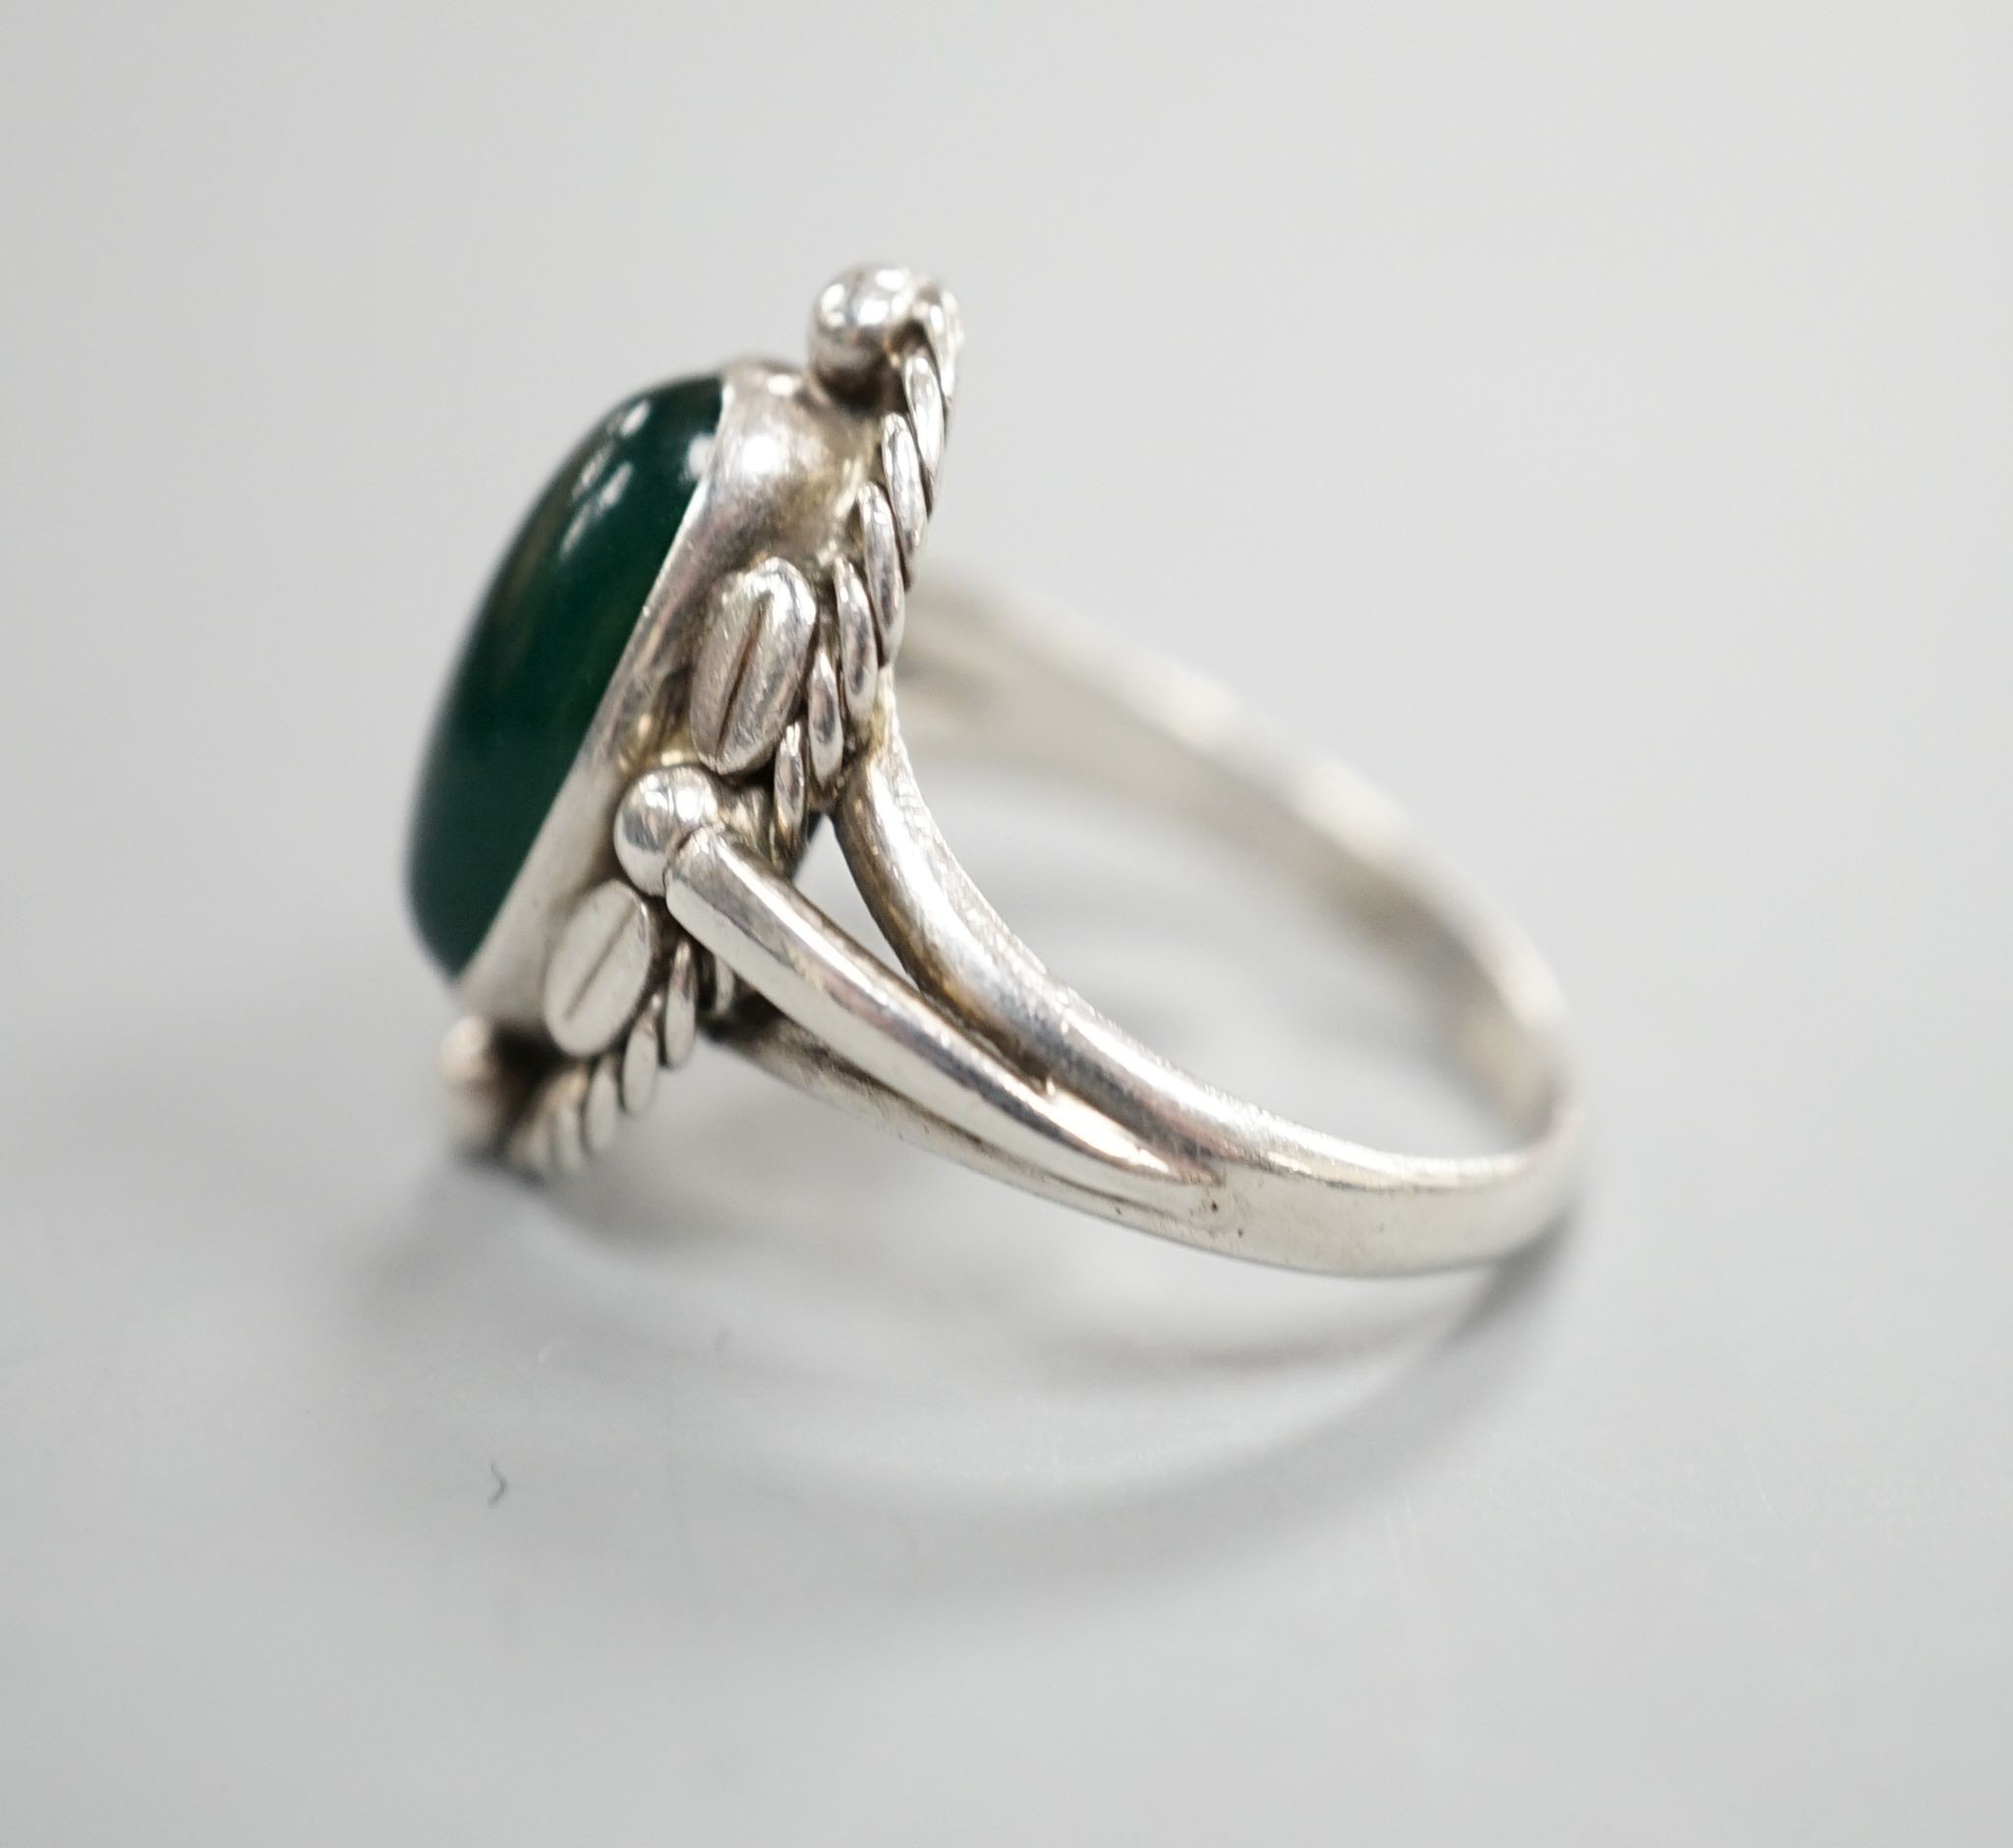 A Georg Jensen sterling and cabochon chrysoprase set dress ring, no.1, size O.